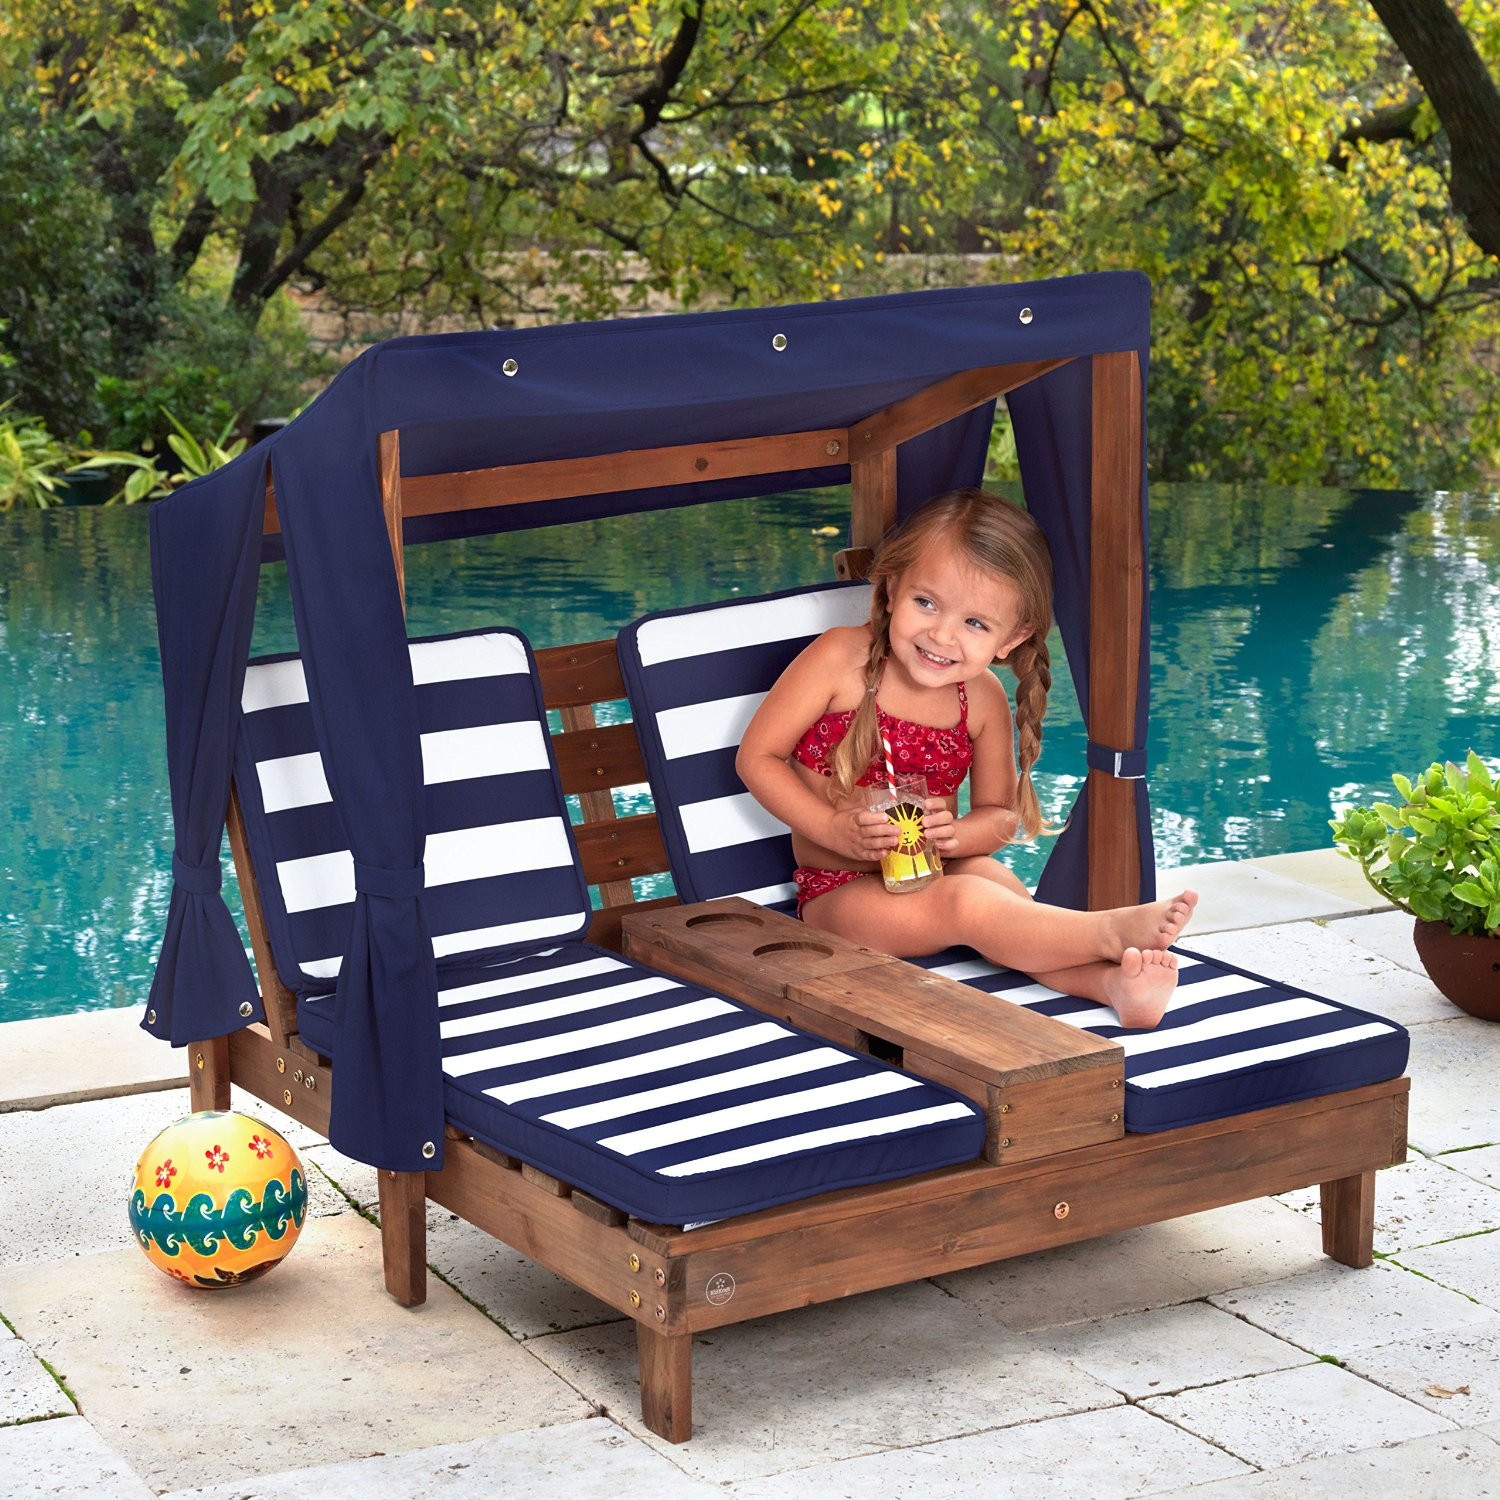 Kids Outdoor Lounge Chair
 Kids Lounge Chairs with Umbrella